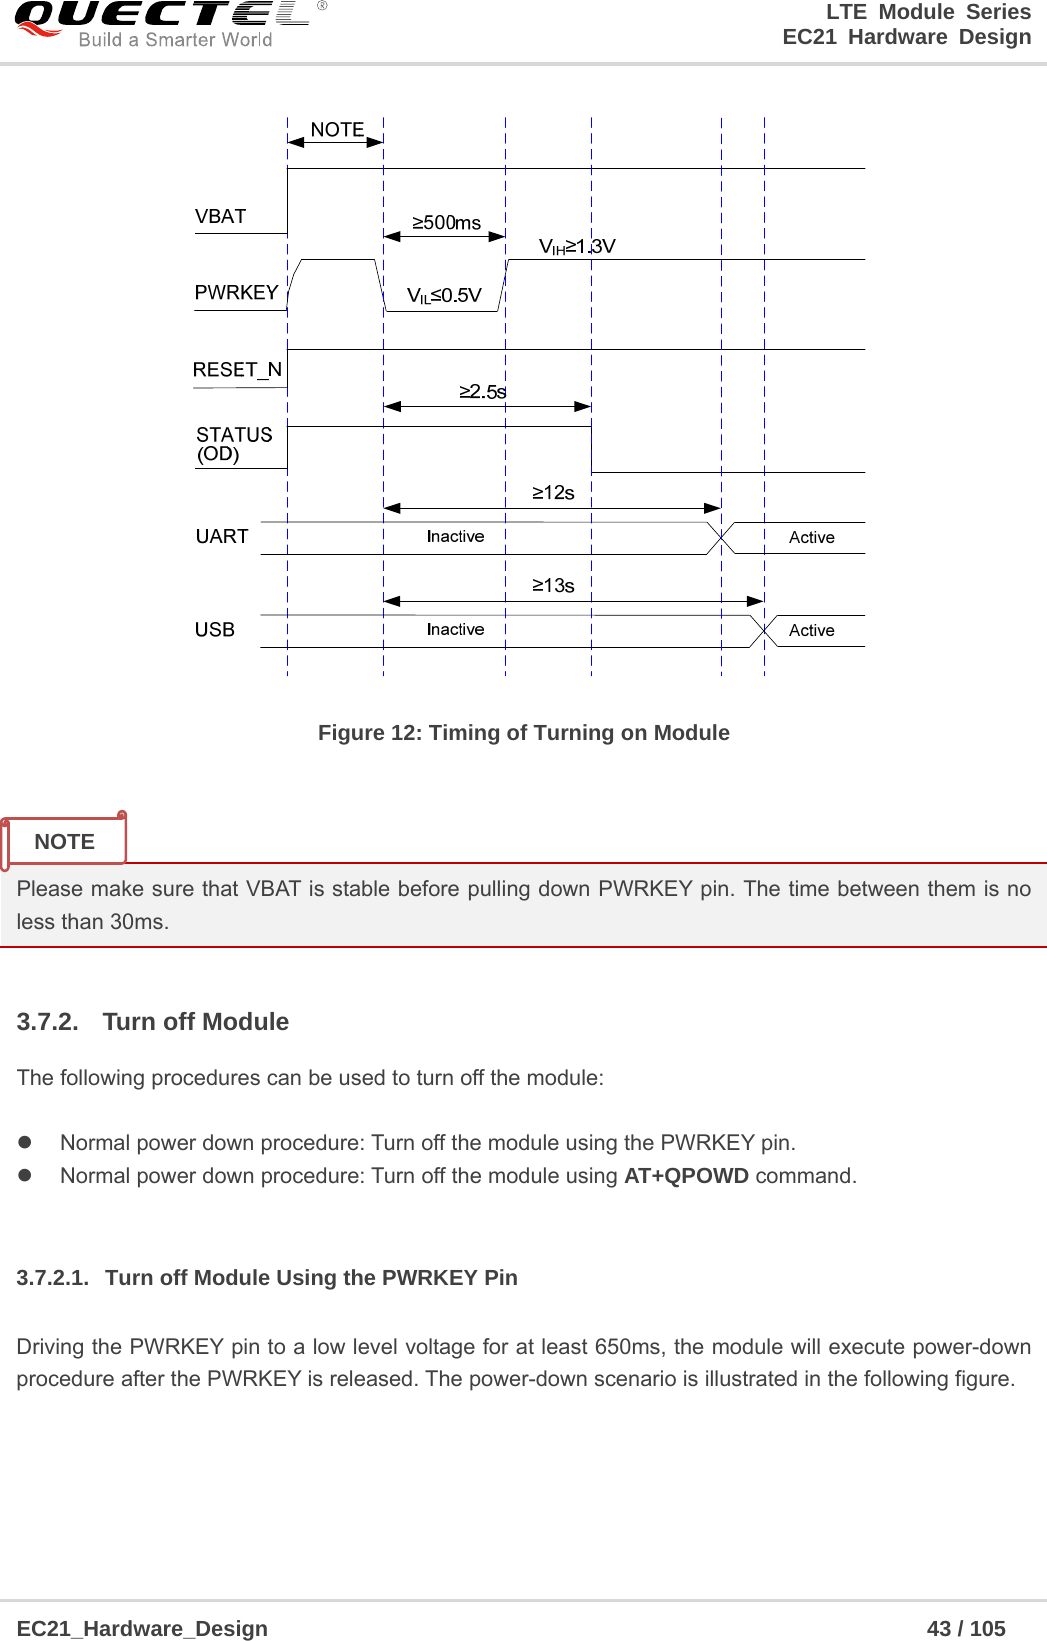                                                                        LTE Module Series                                                                 EC21 Hardware Design  EC21_Hardware_Design                                                            43 / 105     Figure 12: Timing of Turning on Module   Please make sure that VBAT is stable before pulling down PWRKEY pin. The time between them is no less than 30ms.  3.7.2.  Turn off Module The following procedures can be used to turn off the module:    Normal power down procedure: Turn off the module using the PWRKEY pin.   Normal power down procedure: Turn off the module using AT+QPOWD command.  3.7.2.1.  Turn off Module Using the PWRKEY Pin Driving the PWRKEY pin to a low level voltage for at least 650ms, the module will execute power-down procedure after the PWRKEY is released. The power-down scenario is illustrated in the following figure. NOTE 